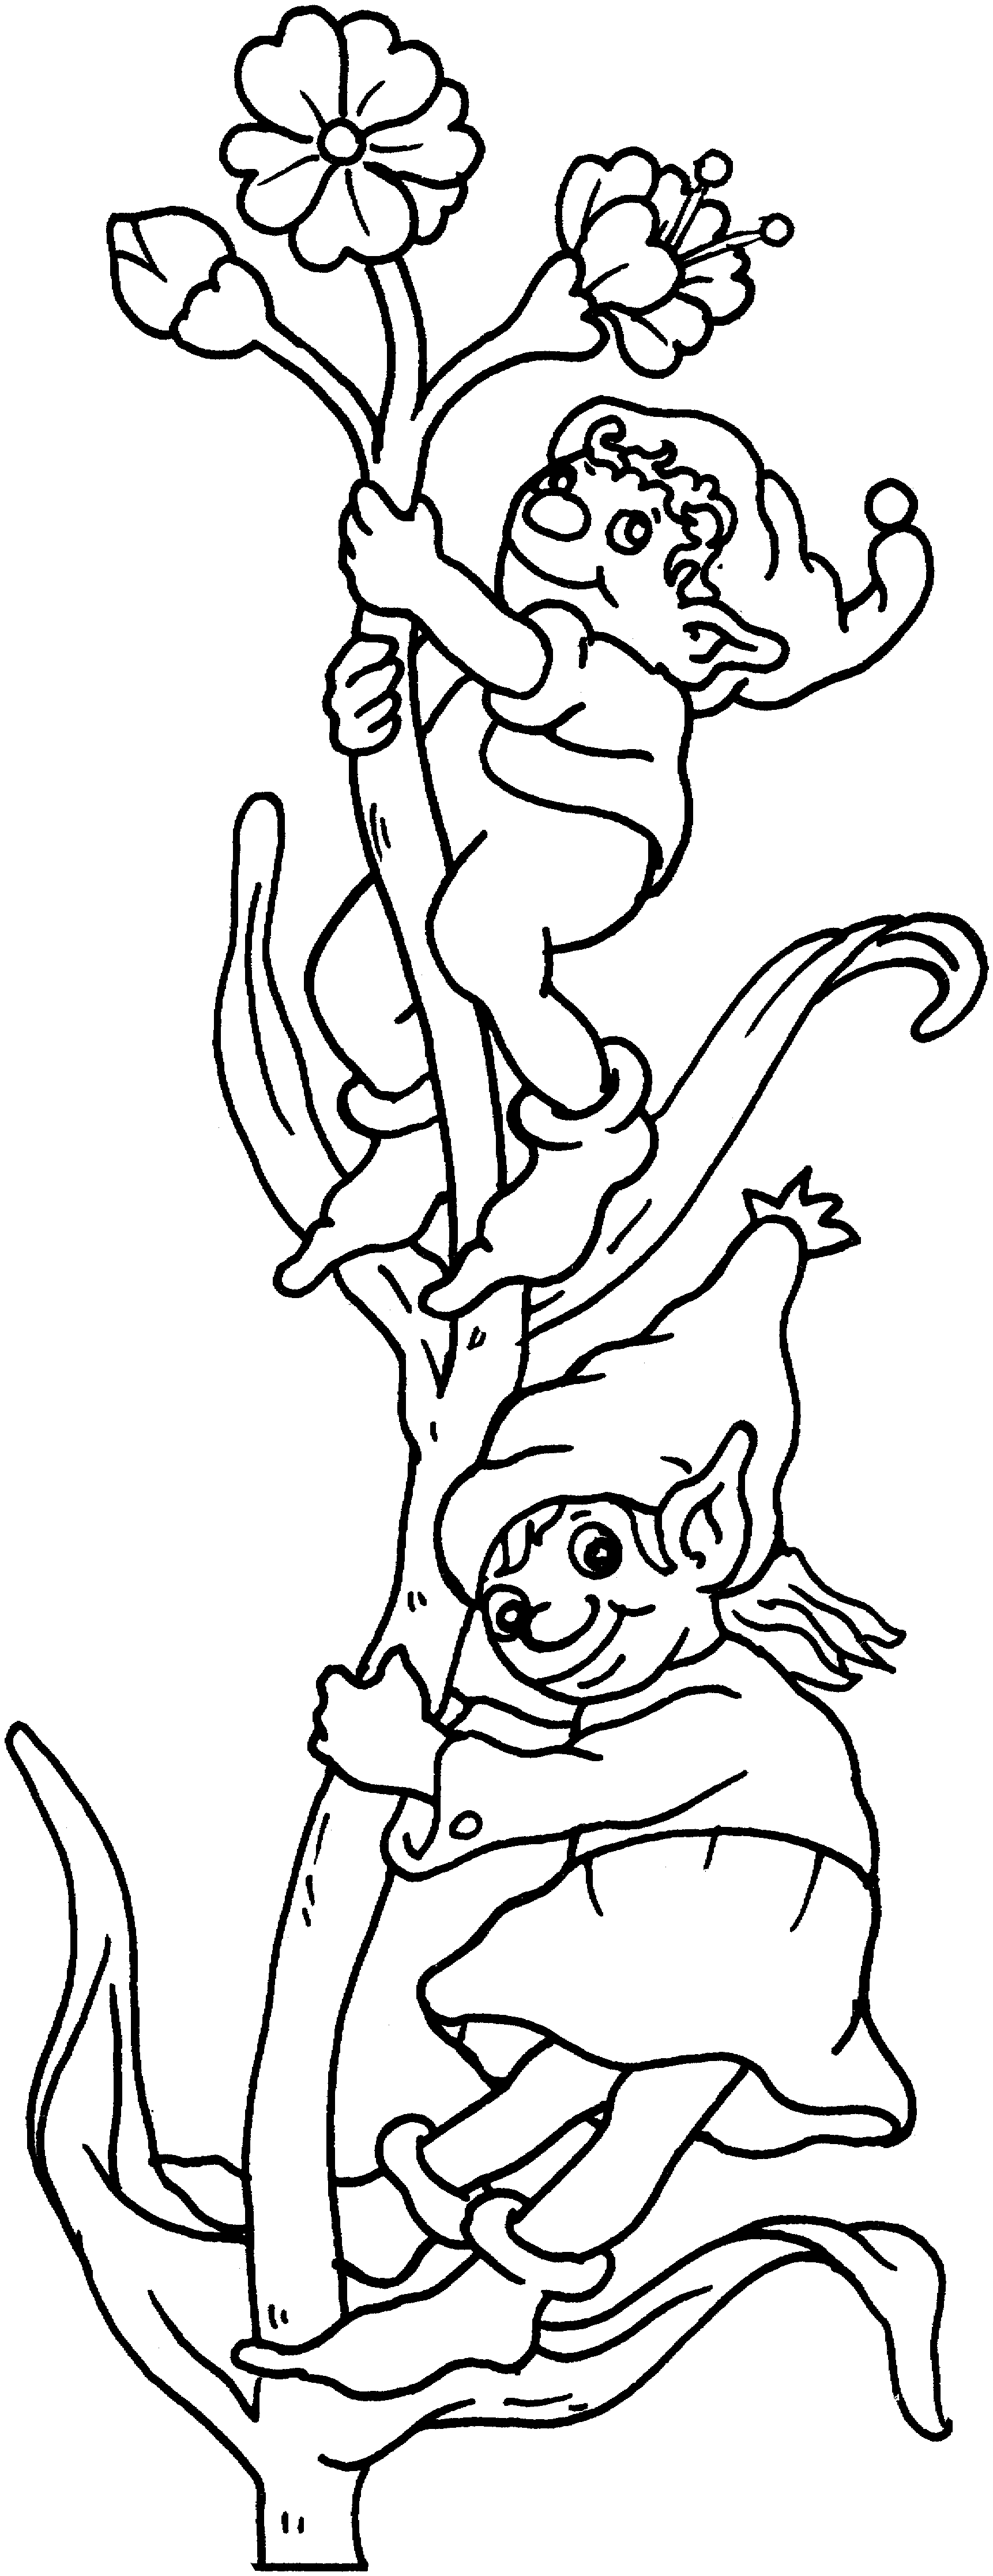 Mystical Creature Coloring Pages